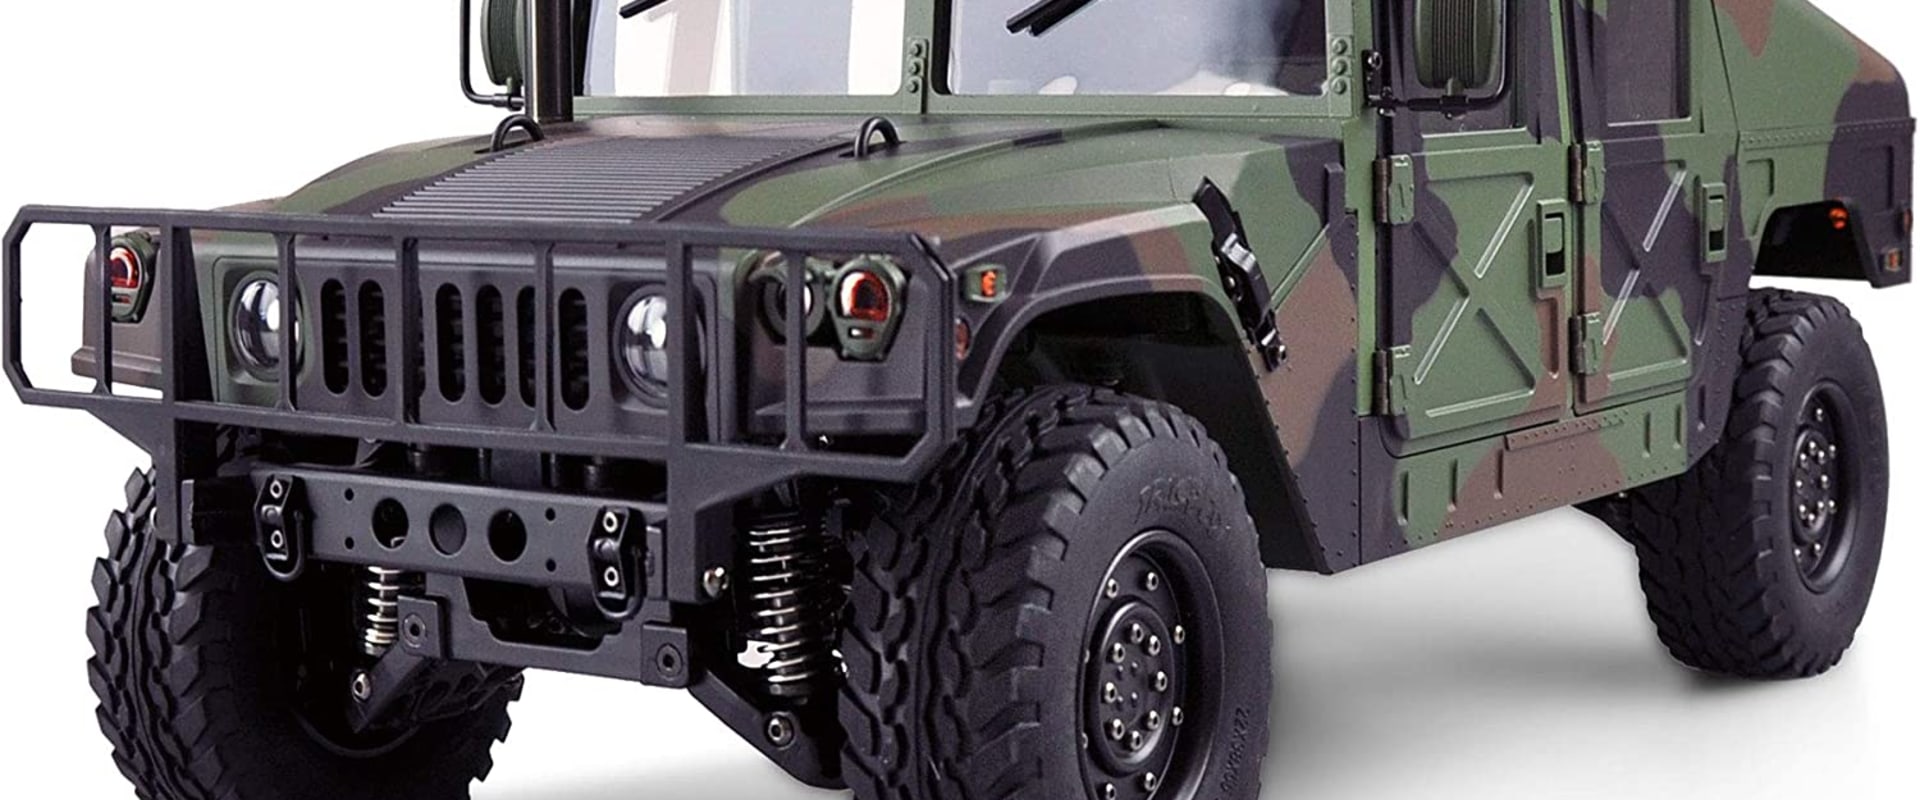 Lighting Solutions for Military Vehicles: What Are Your Options?